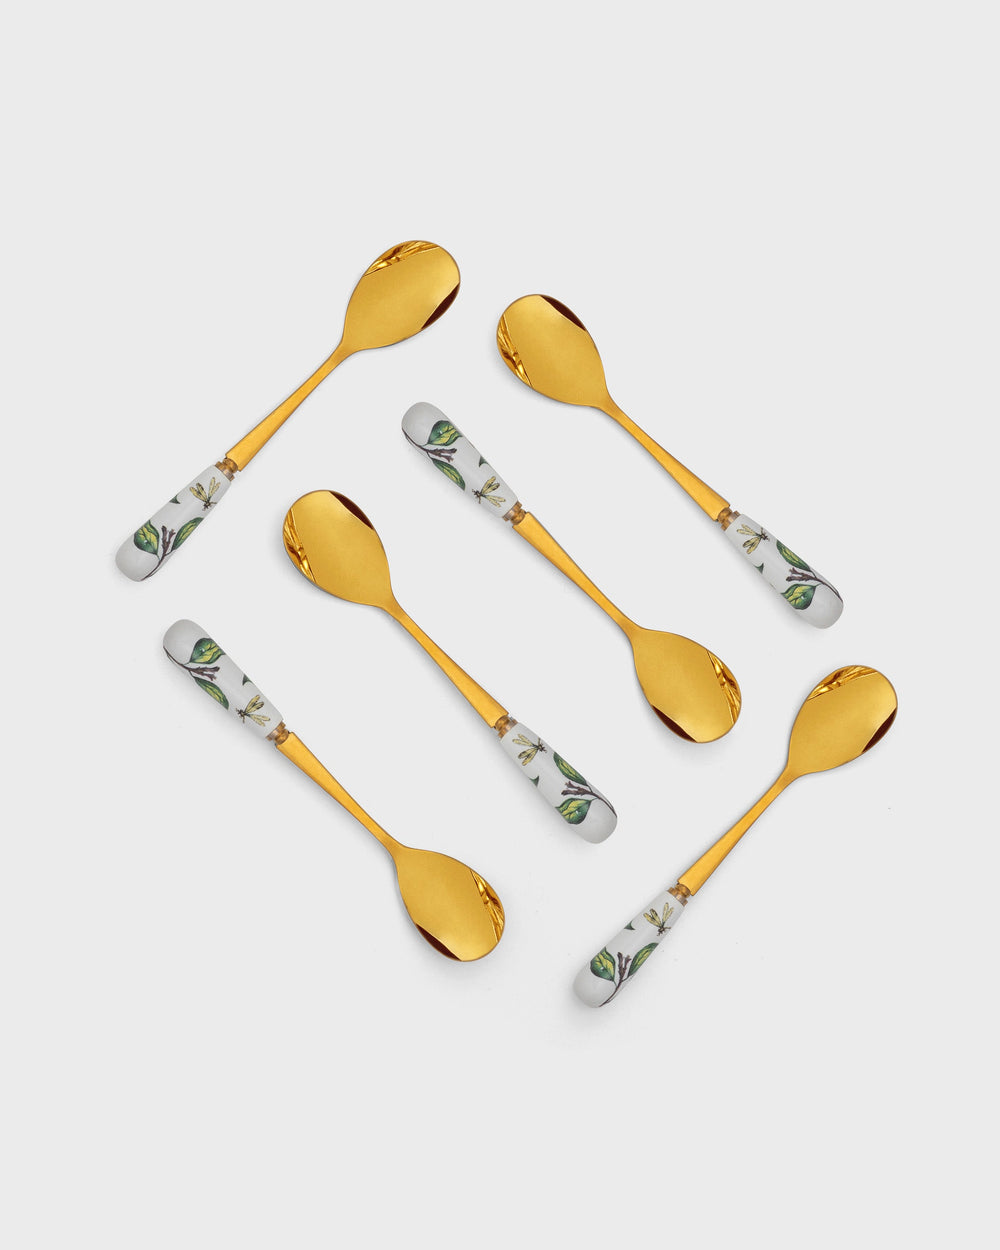 Tania Bulhoes Espresso Spoon Folhas Gold-Plated Stainless Steel Fine Porcelain 6 Piece Set